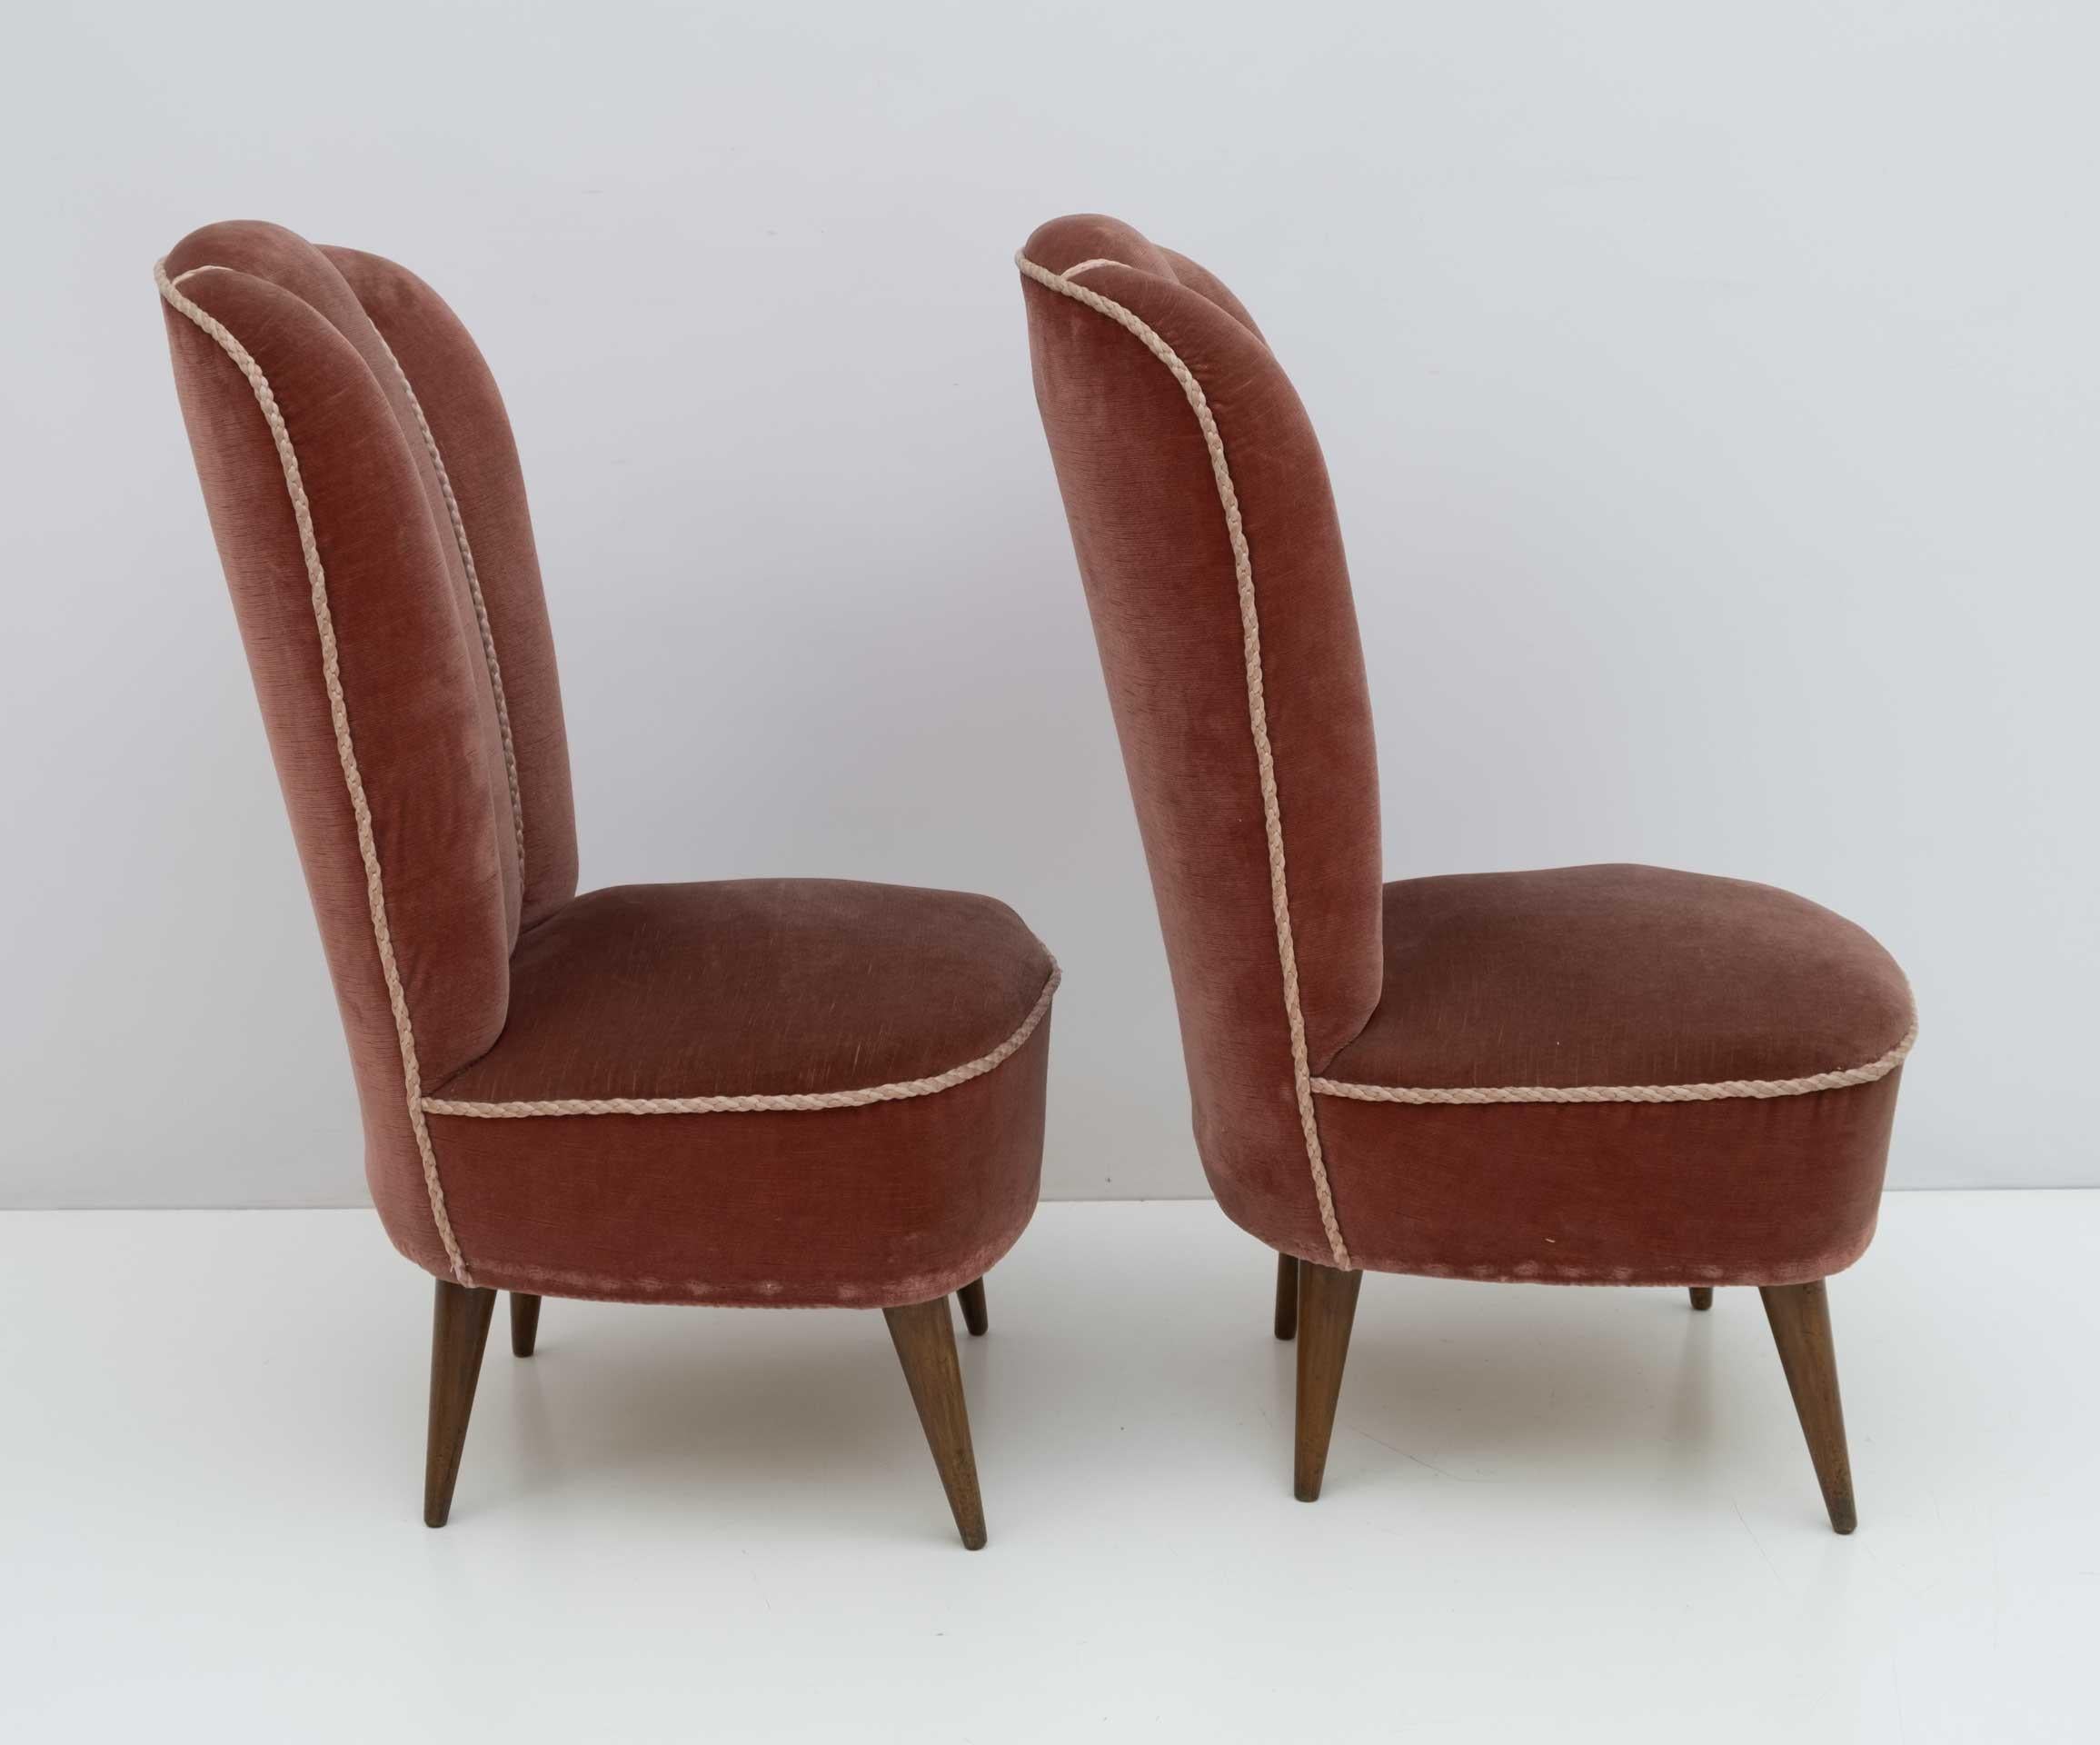 Mid-20th Century Attributed Gio Ponti Mid-Century Italian Small Armchairs by ISA Bergamo, Pair For Sale